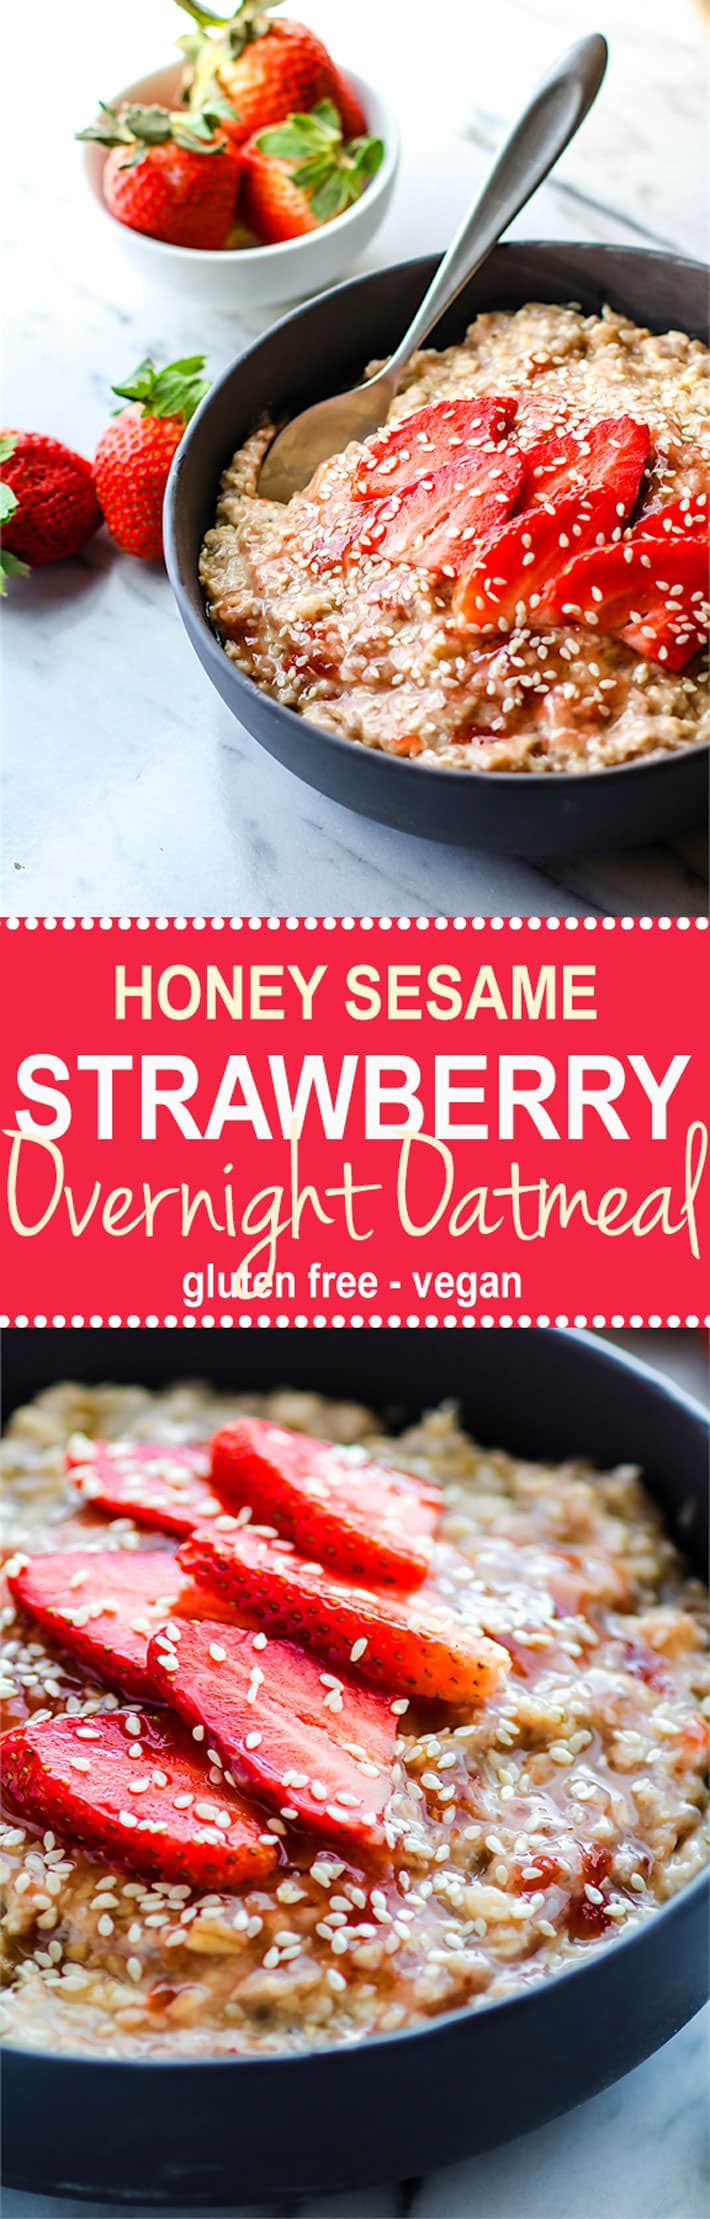 Gluten Free Honey Sesame Strawberry Overnight oatmeal! A light and energizing overnight oatmeal that is vegan, simple to make, and loaded with nourishment! @cottercrunch